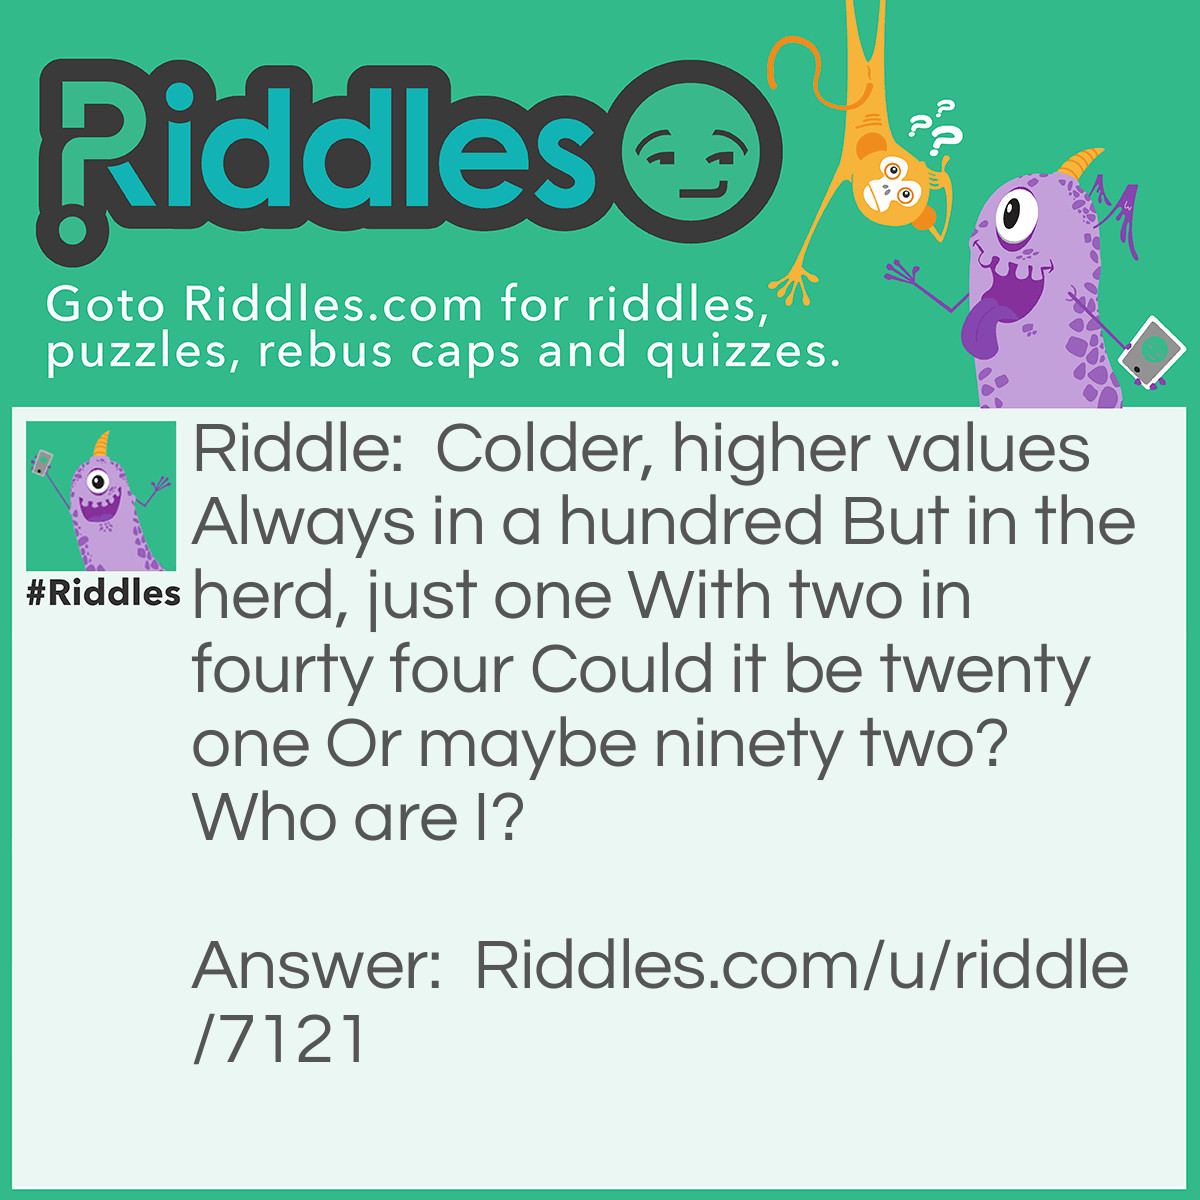 Riddle: Colder, higher values
Always in a hundred
But in the herd, just one
With two in fourty four
Could it be twenty one
Or maybe ninety two?
Who are I? Answer: U / ewe / you